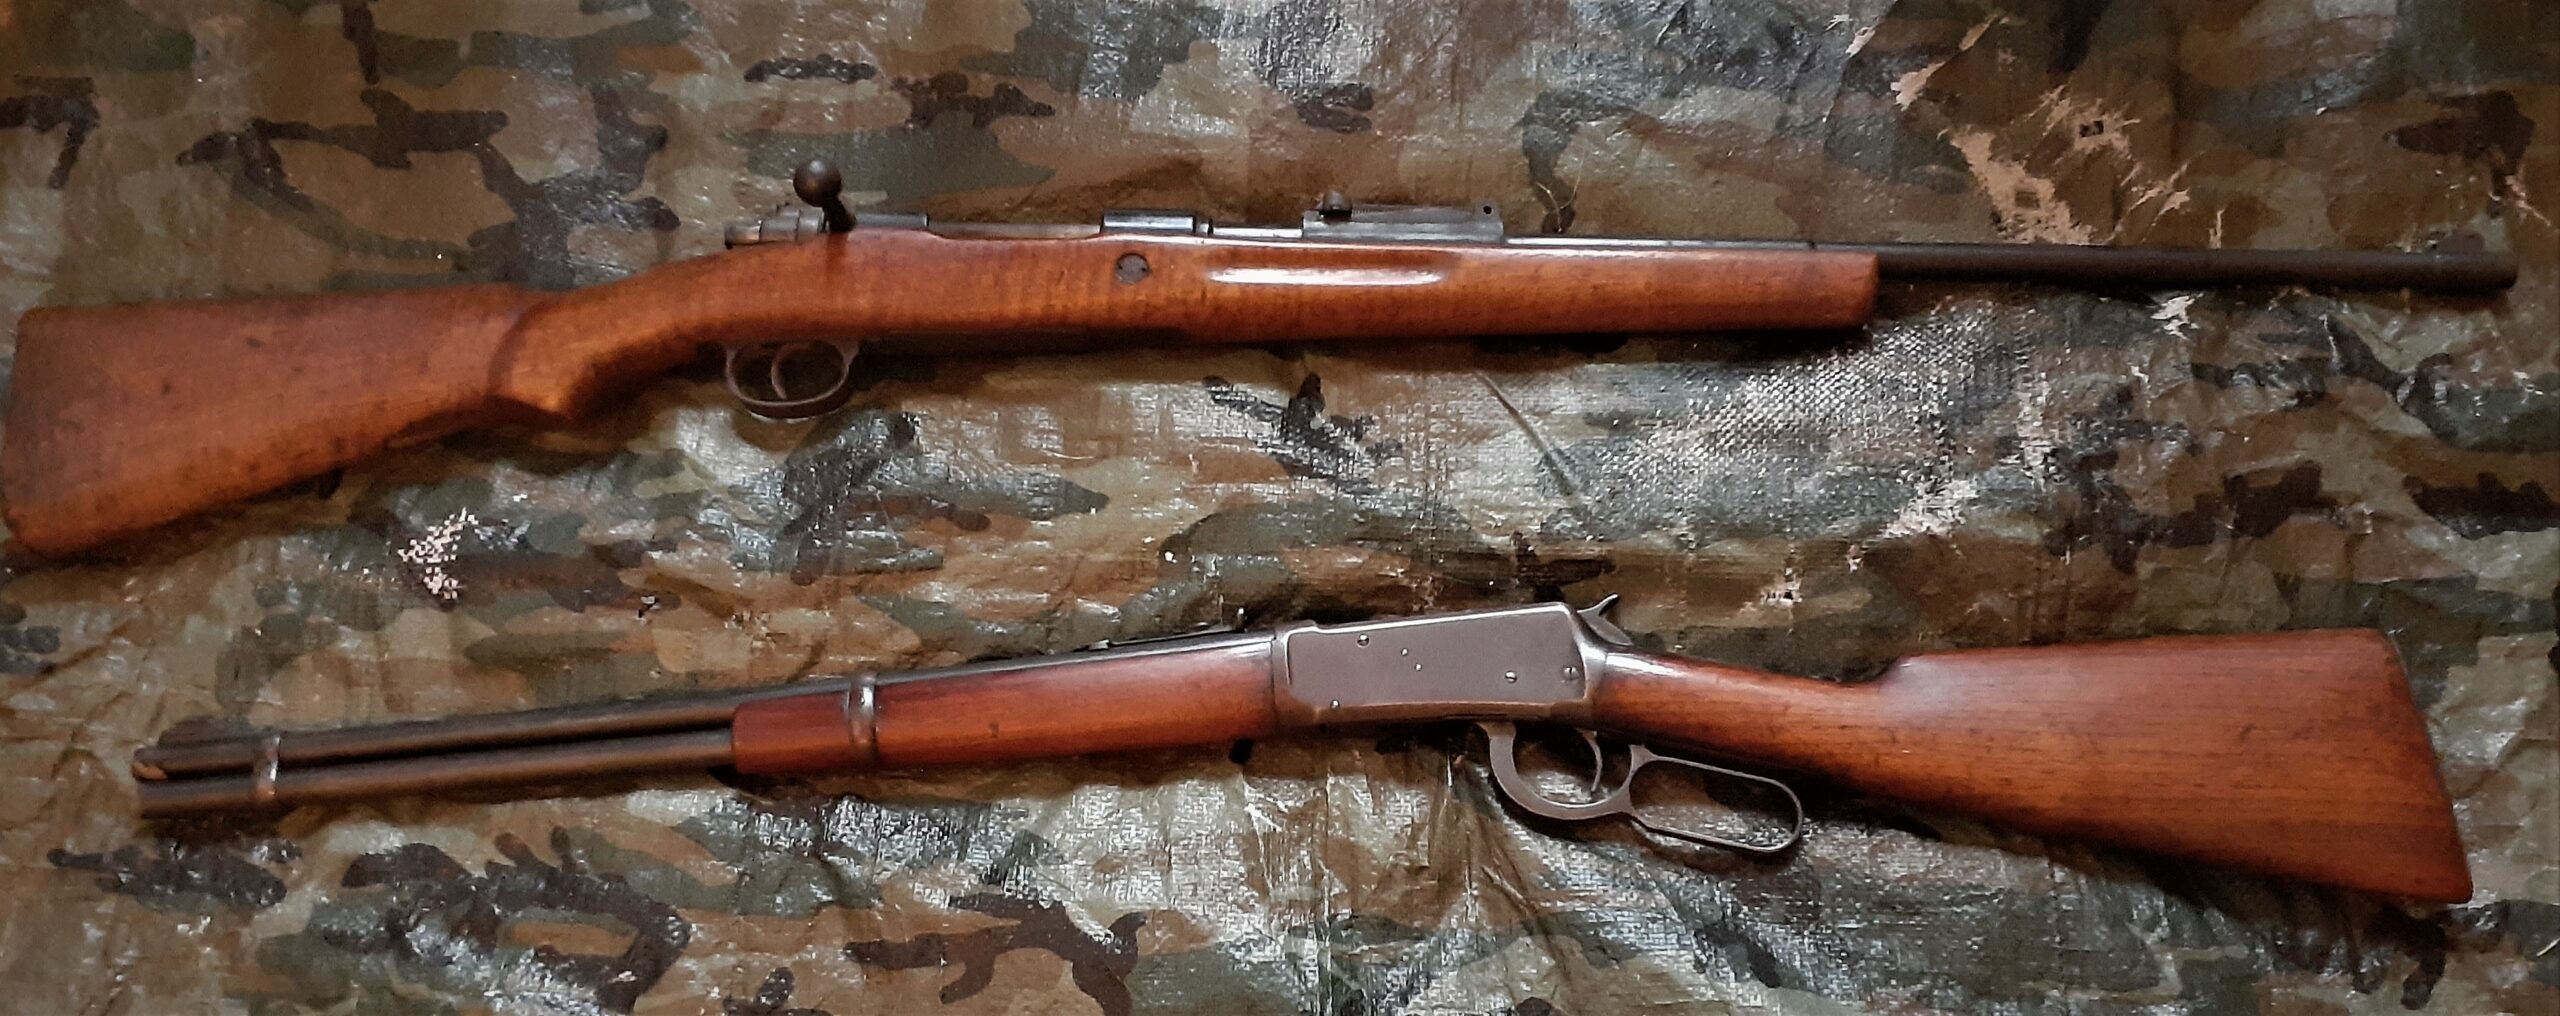 Are Lever Action Rifles A Good Choice for Self Defense ?